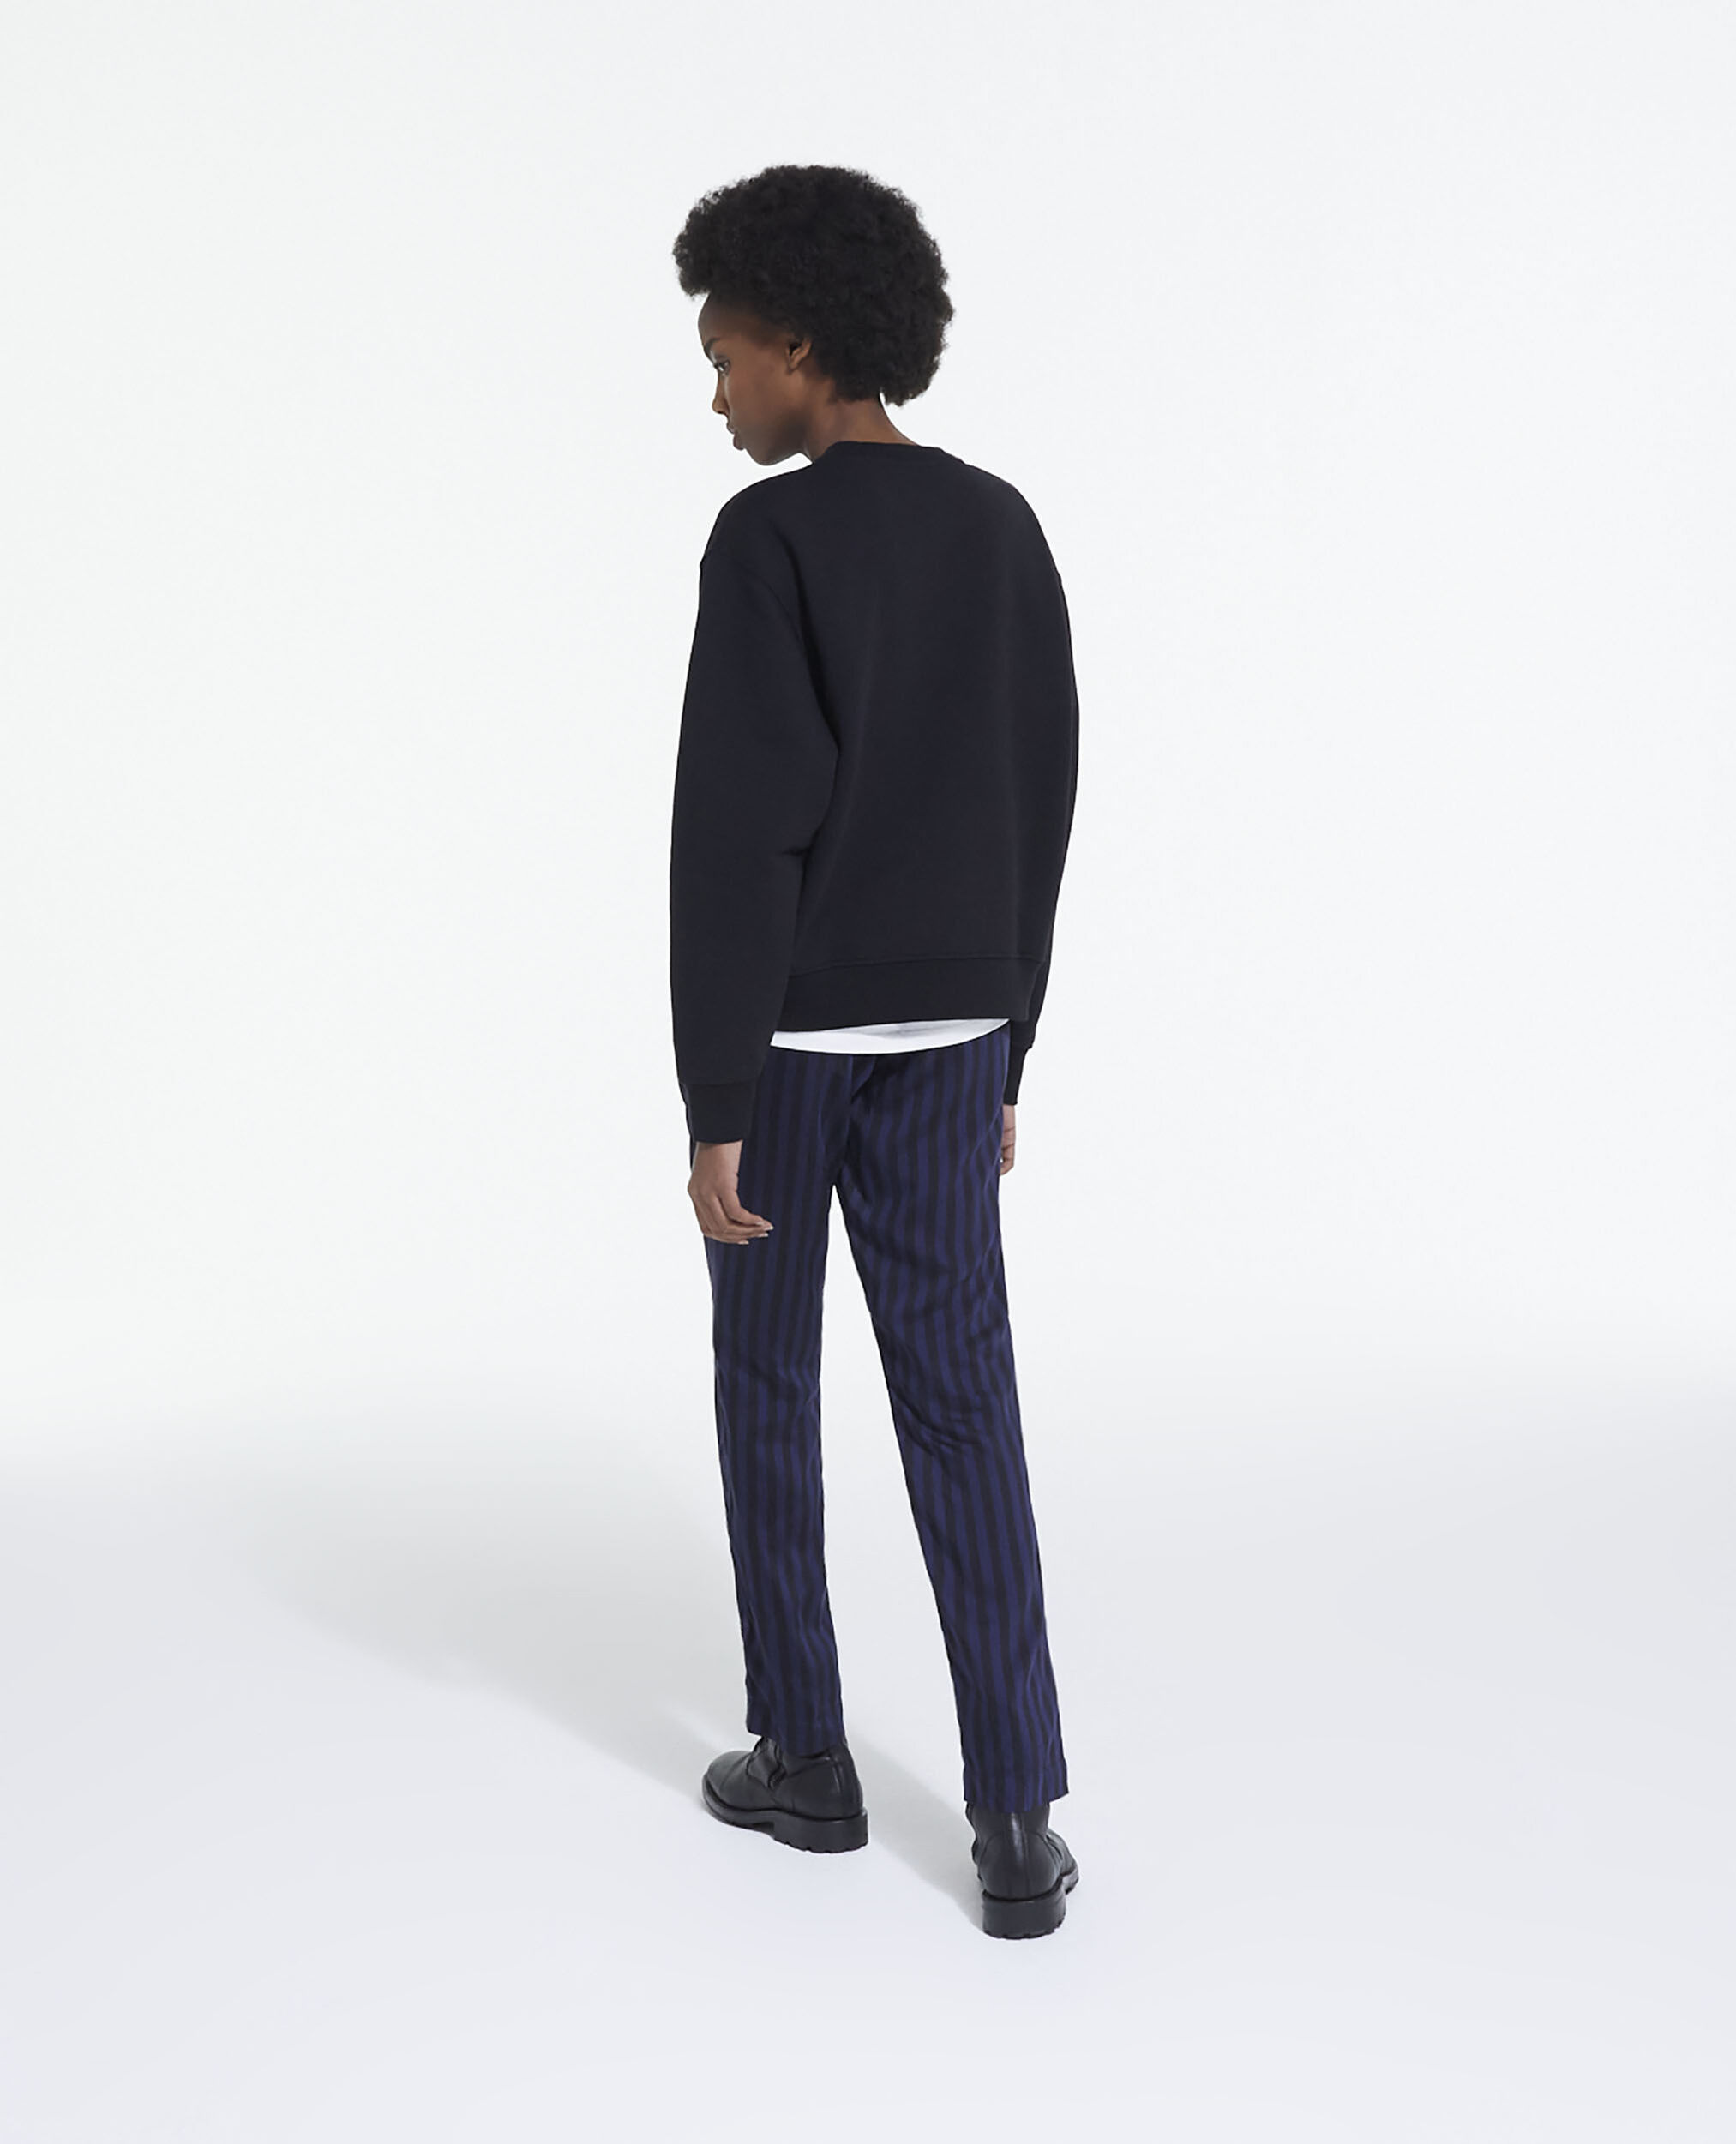 Straight-cut striped pants, BLACK NAVY, hi-res image number null